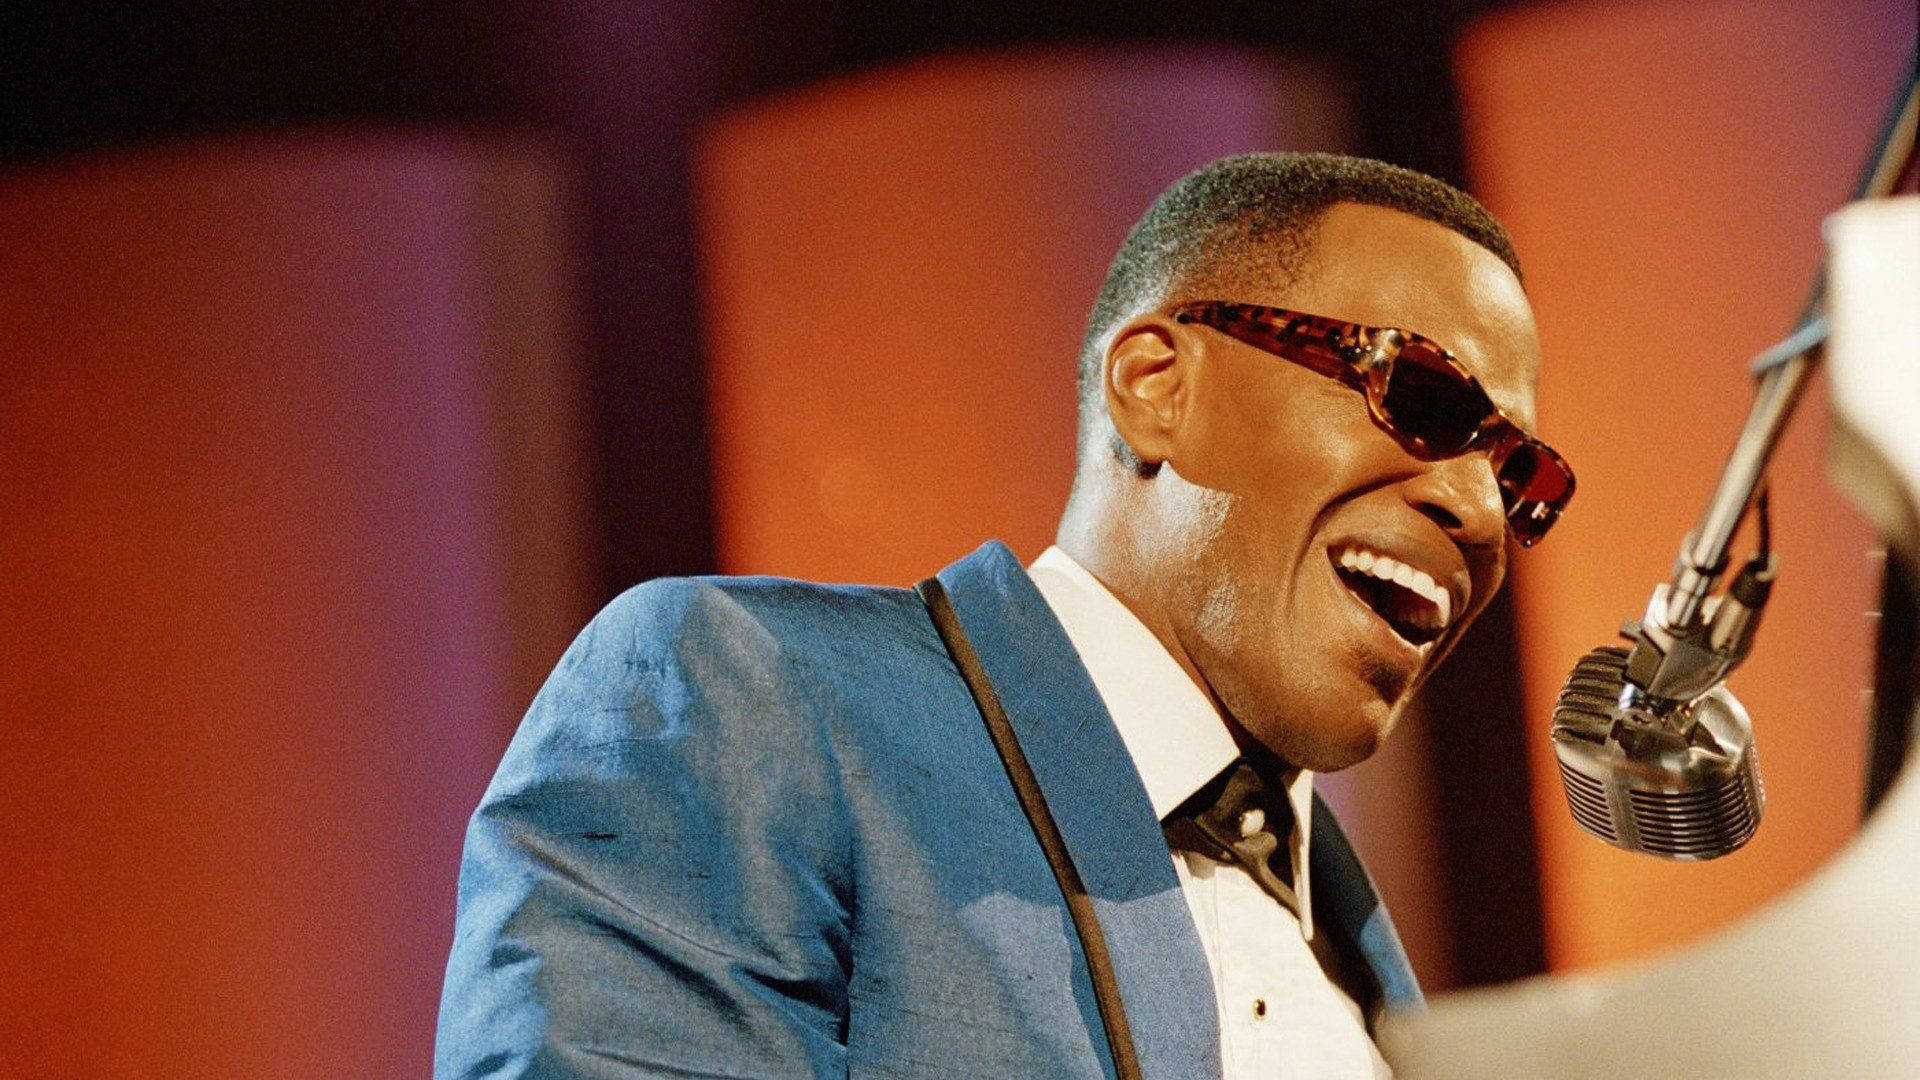 Ray Charles American Songwriter Wallpaper